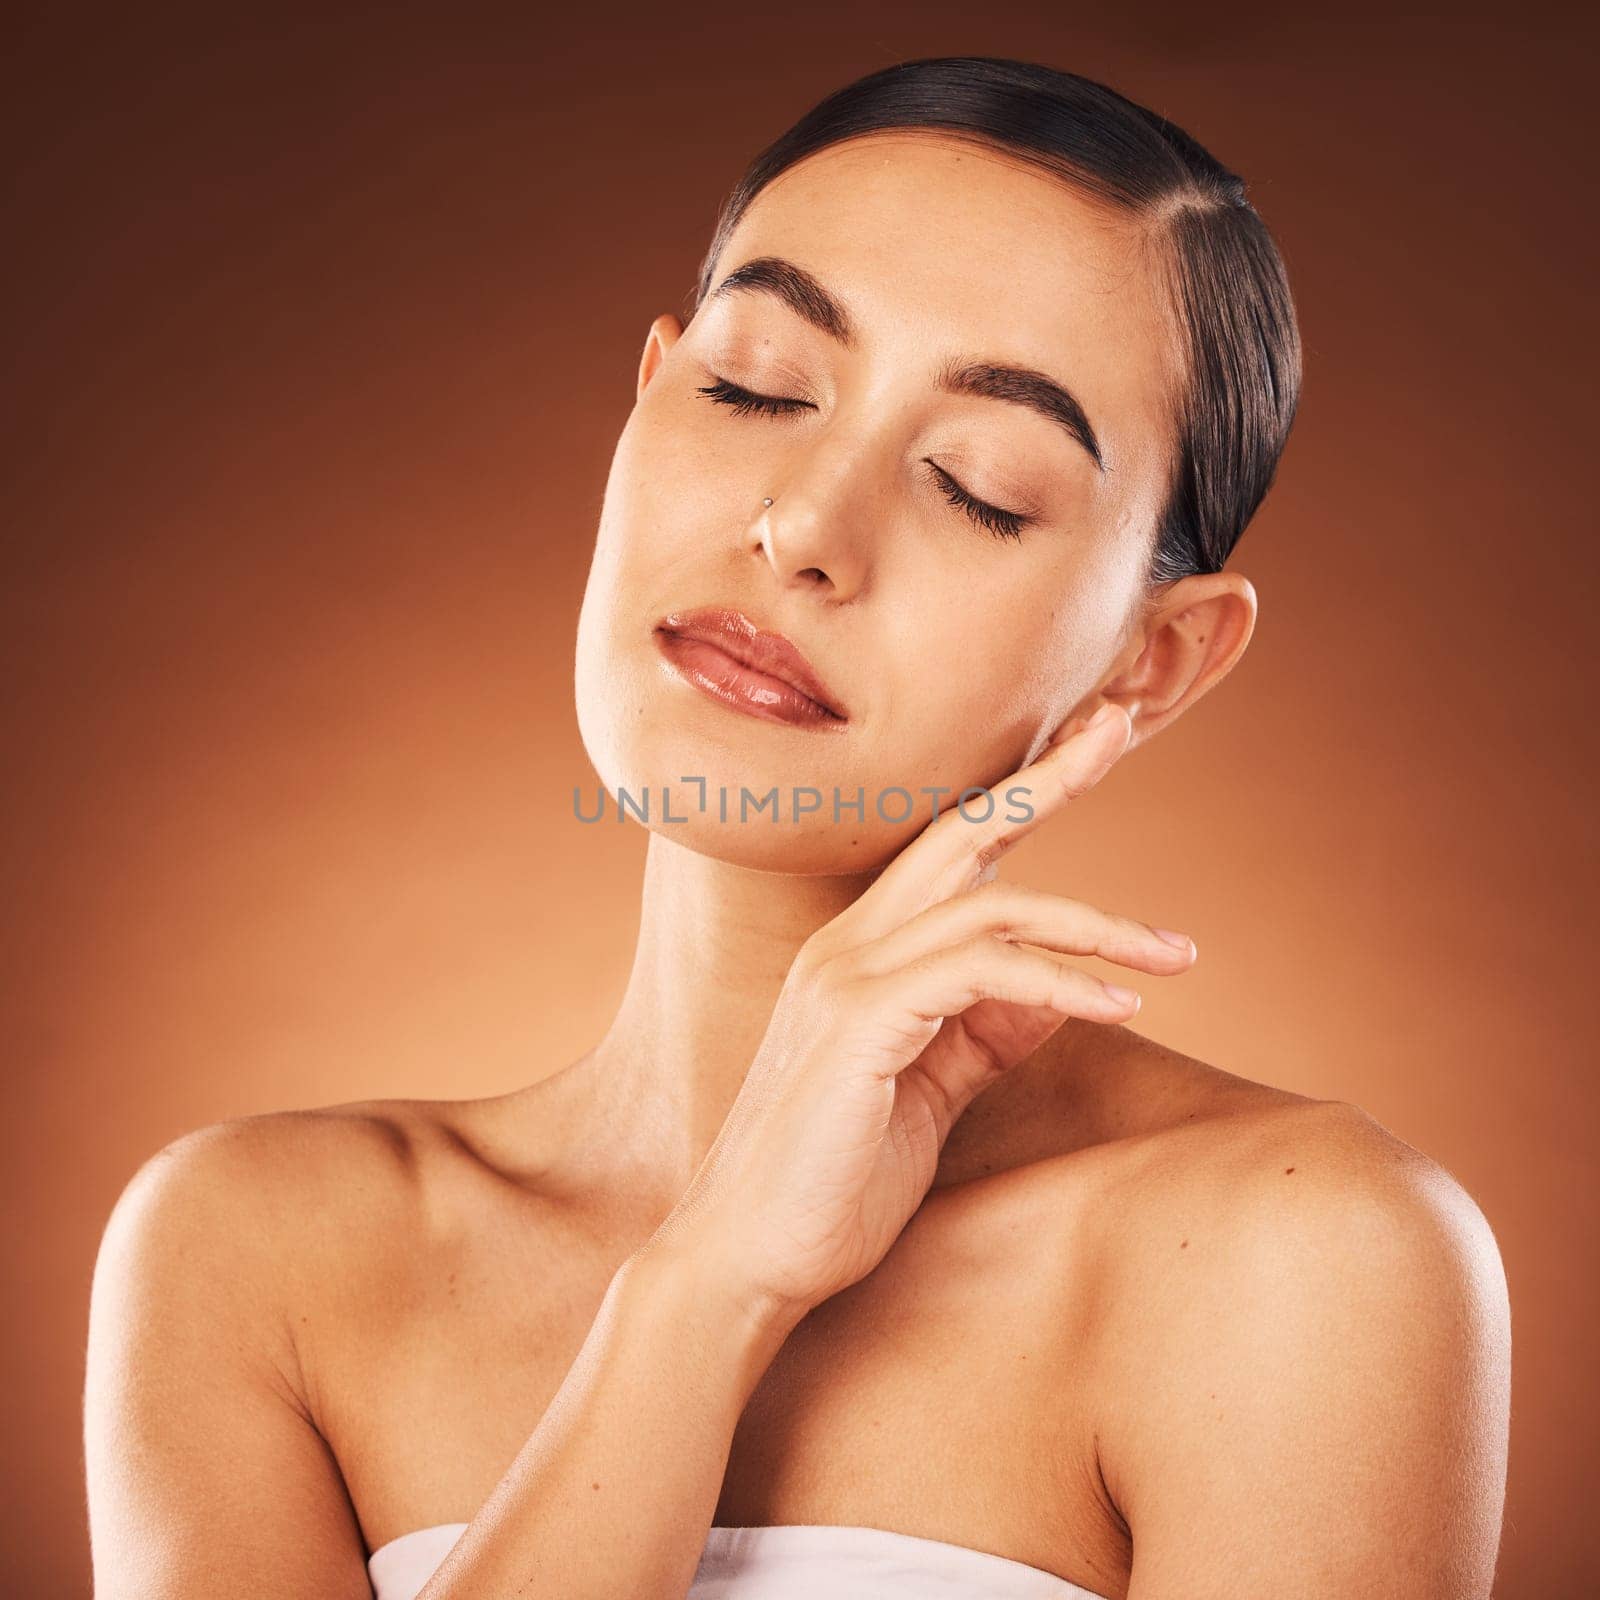 Face, beauty and skincare with a model woman in studio on a brown background for wellness or luxury. Spa, facial and cosmetics with an attractive young female posing to promote a skin product.